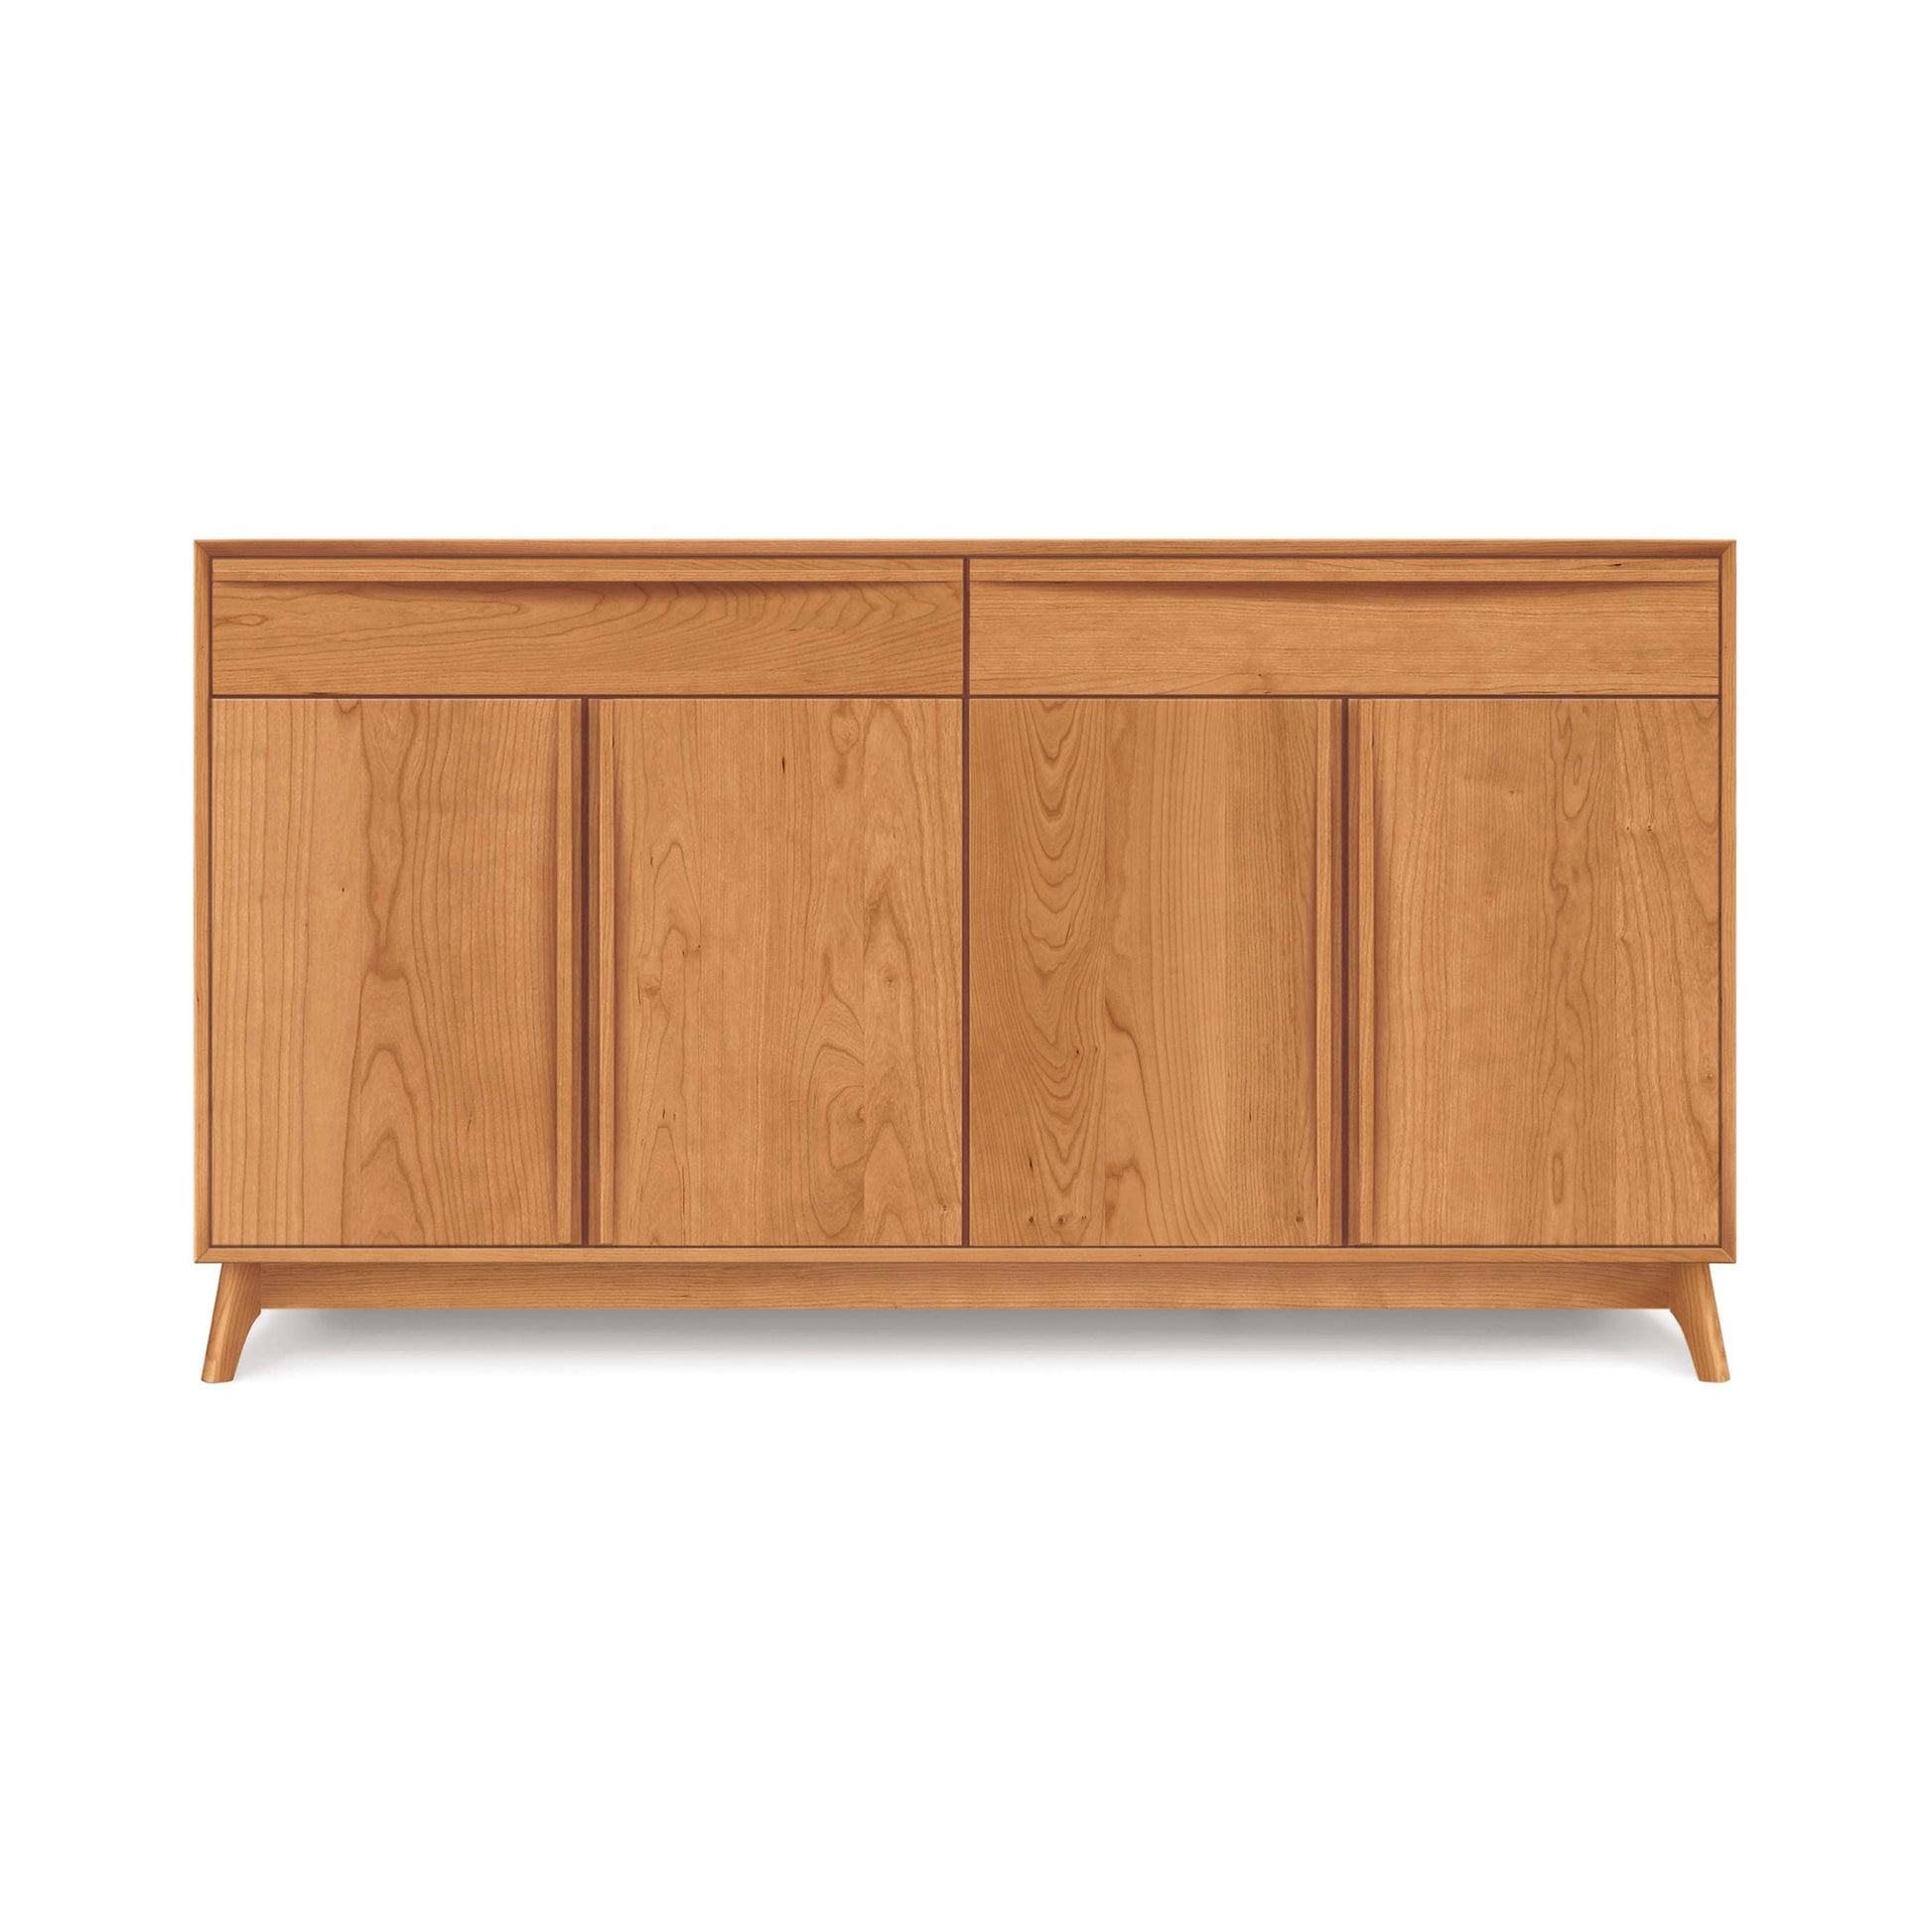 A handcrafted, solid wood Copeland Furniture Catalina 2-Drawers, 4-Door Buffet sideboard with closed doors on a white background.